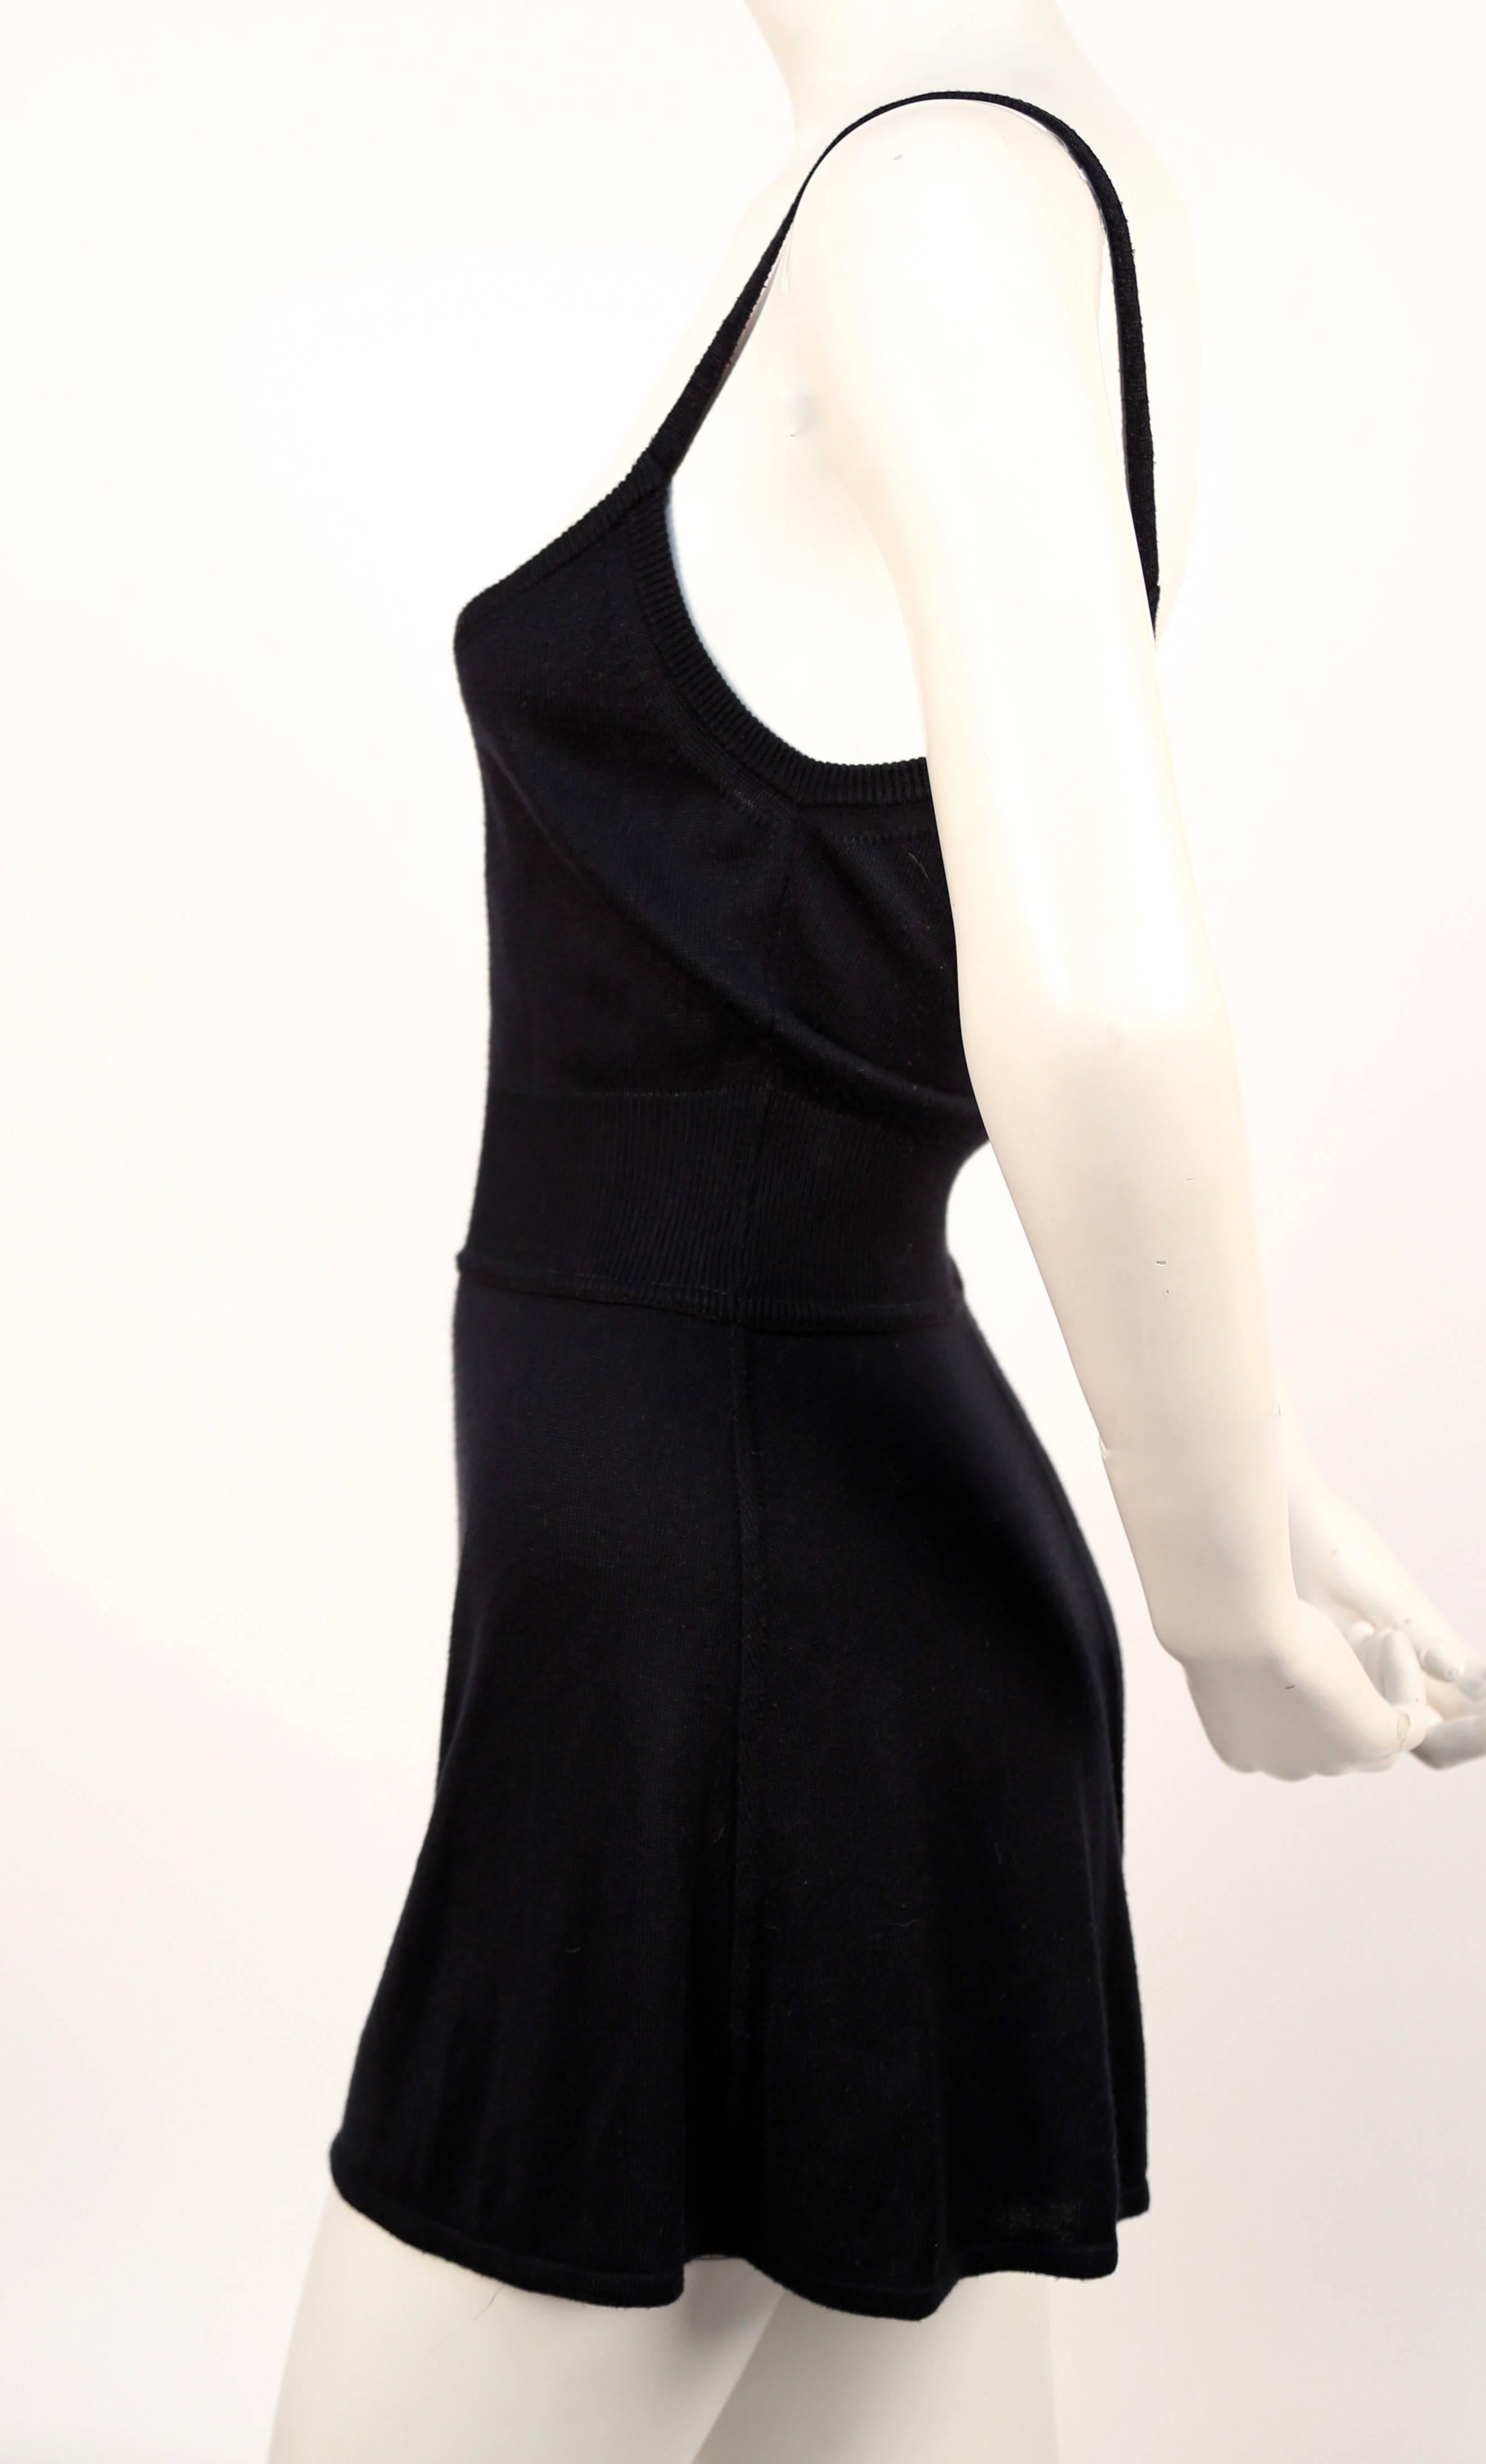 Black romper with set in woven waistband designed by Azzedine Alaia. French size 36 (best fits a FR 38 or tall FR 36). Approximate measurements: bust 30